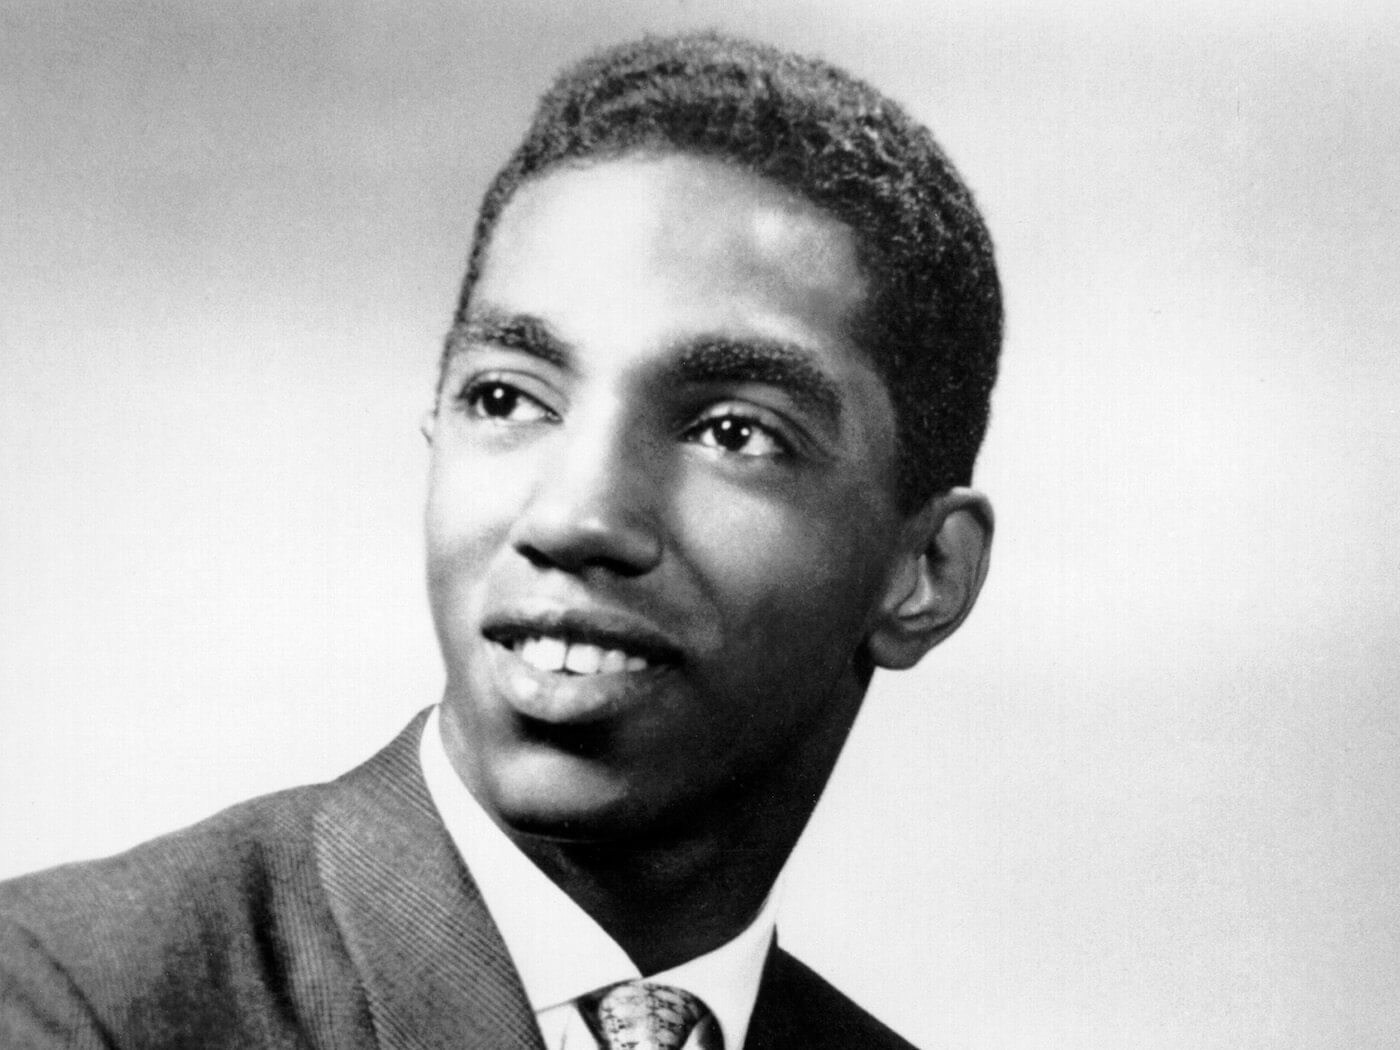 Pioneering Motown singer and songwriter Barrett Strong dies, aged 81